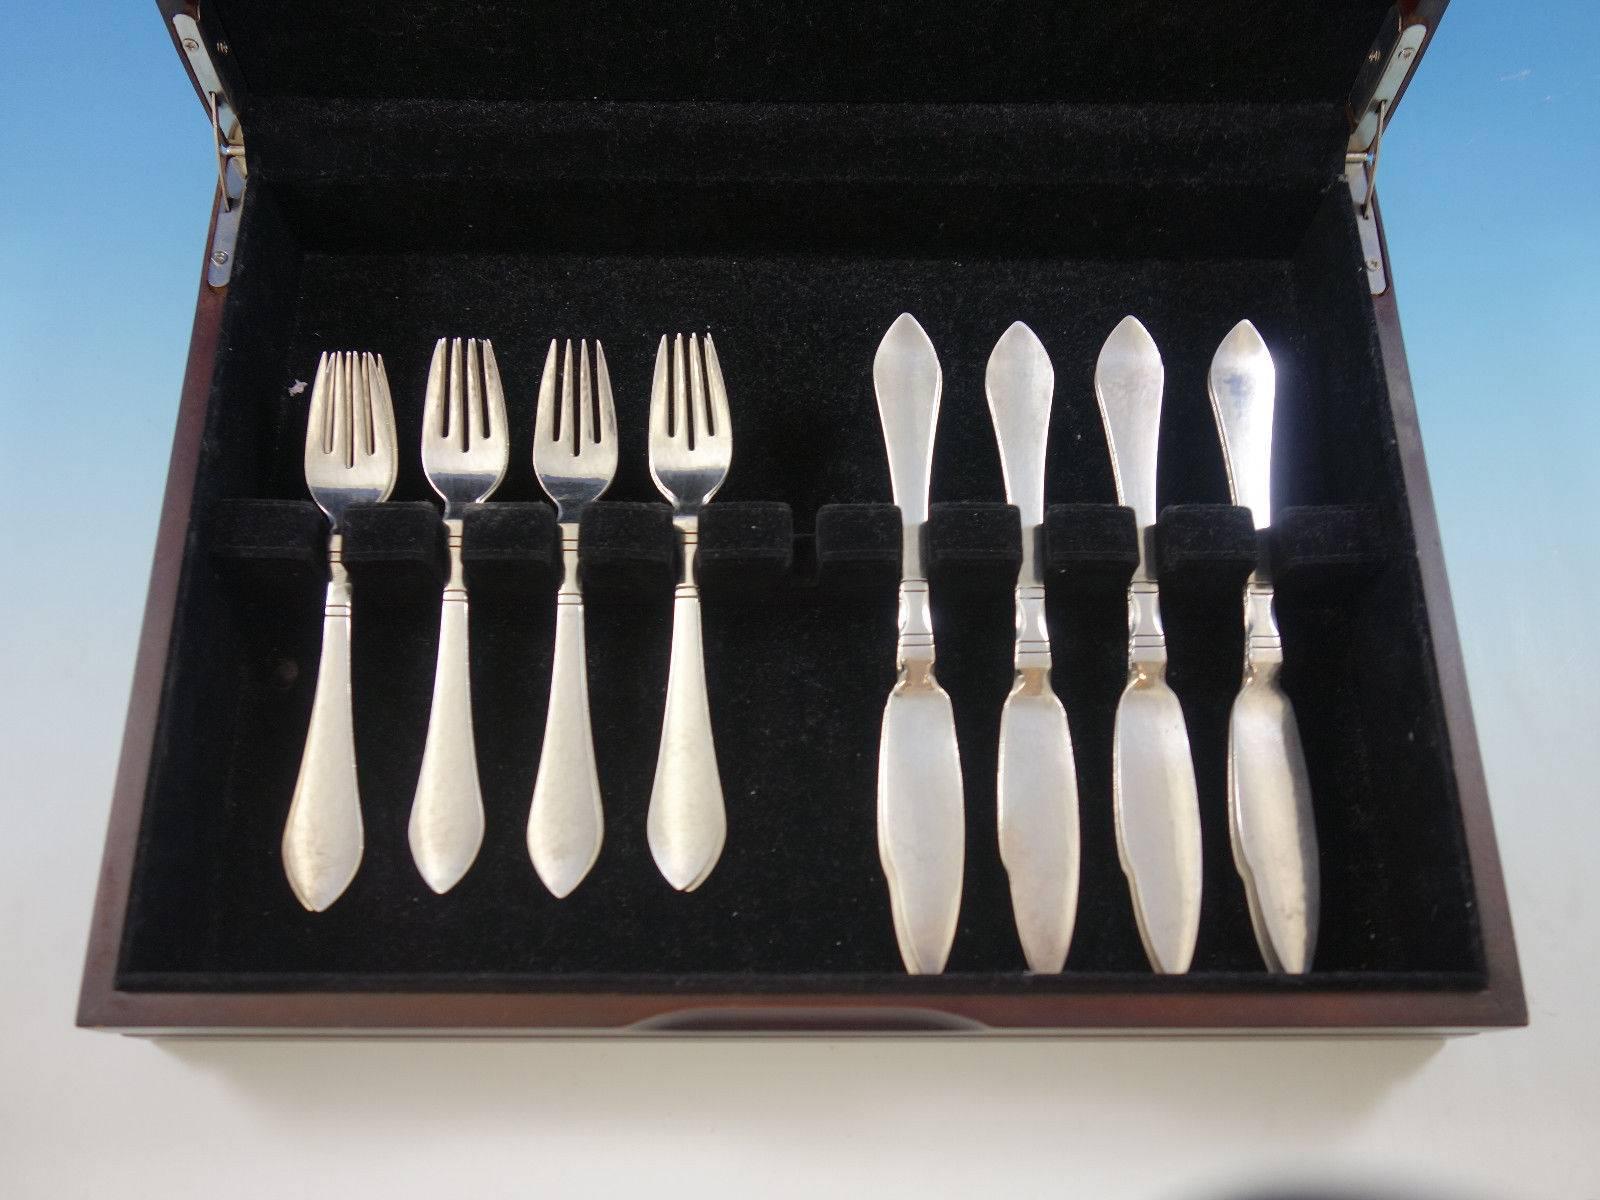 Continental by Georg Jensen sterling silver Individual Fish set, 16 pieces. This set includes: 

8 individual fish knives, flat handle all-sterling, 8 1/4